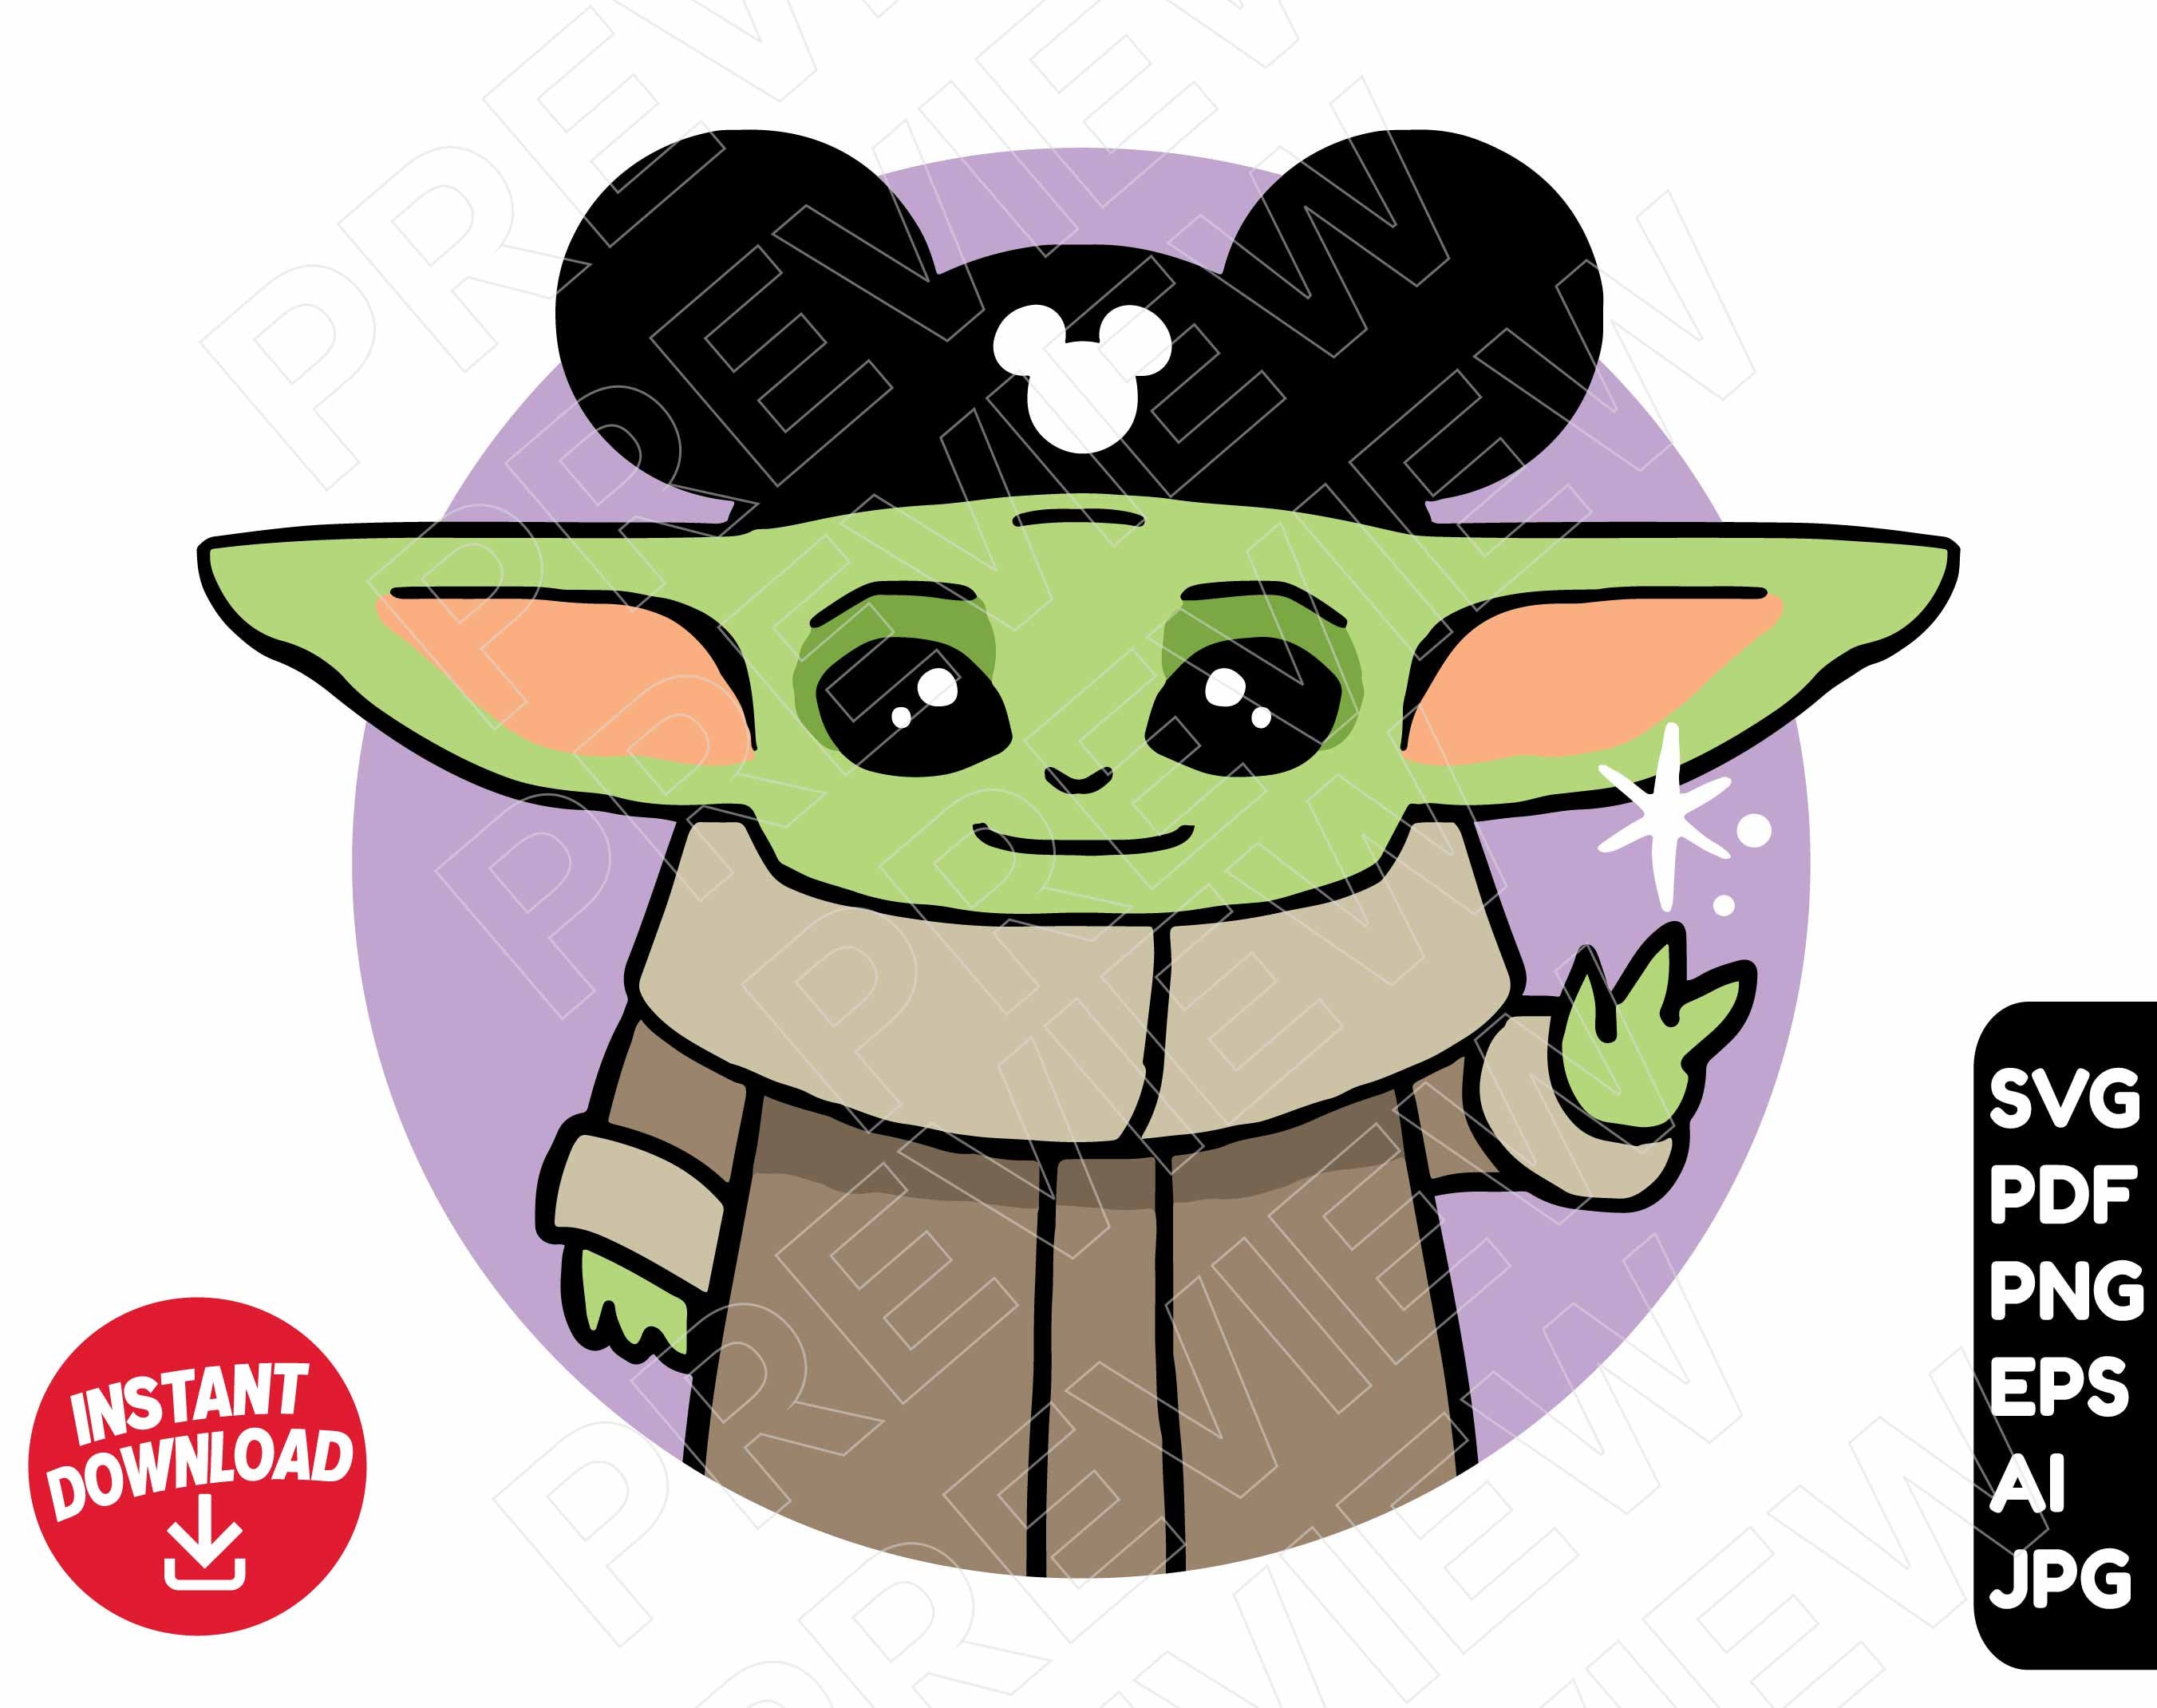 baby-yoda-ers-png-and-svg-file-etsy-my-xxx-hot-girl